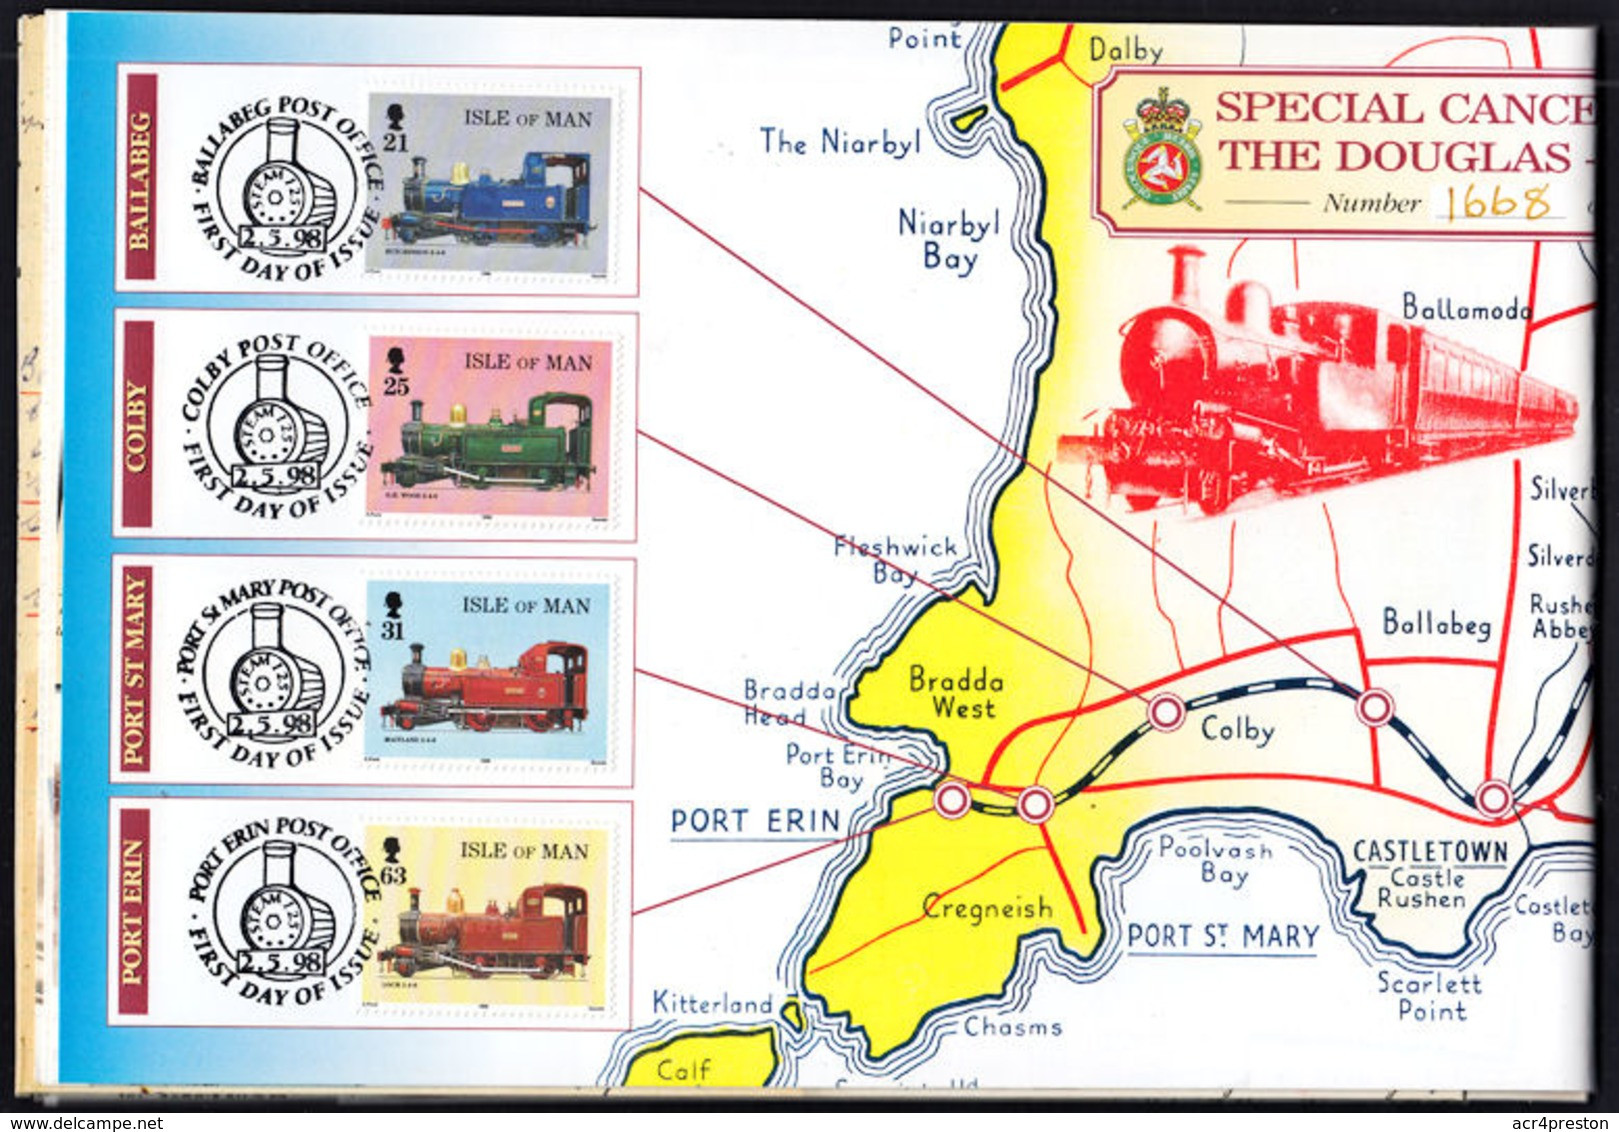 j0003 ISLE OF MAN 1998, 125th Anniversary of Isle of Man Railways, Limited Edition Post Office Booklet